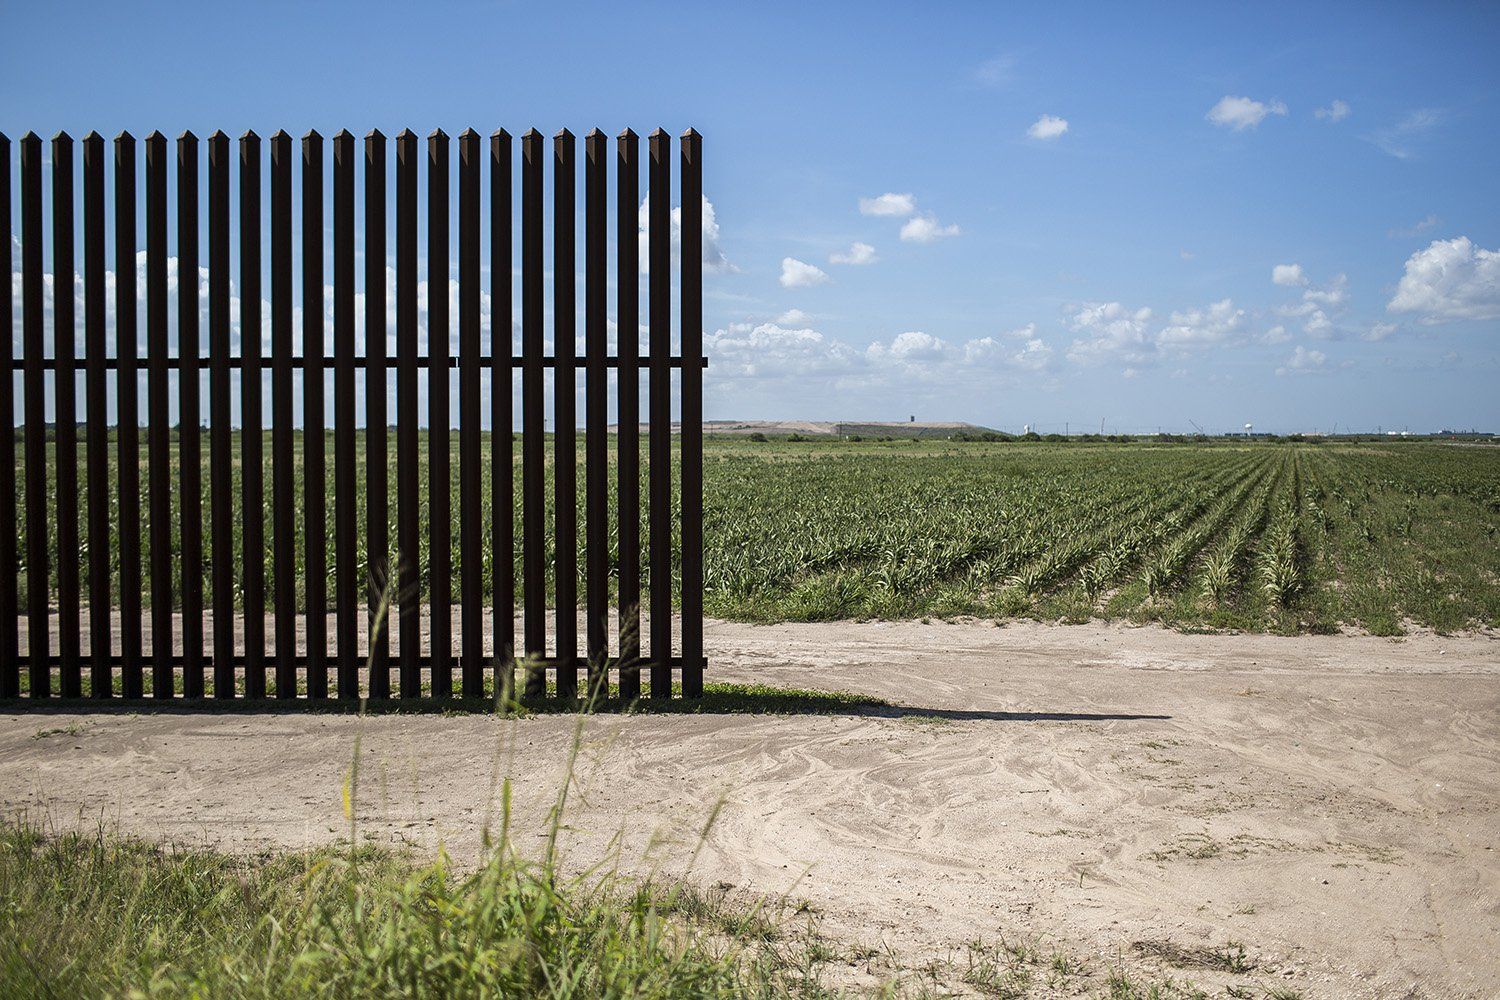 The end of a segment of the border fence near Oklahoma Avenue in Brownsville. To avoid paying for land trapped between the fence and the Rio Grande, the government left wide gaps so land owners could reach their fields. Image by Martin do Nascimento. United States, 2017.